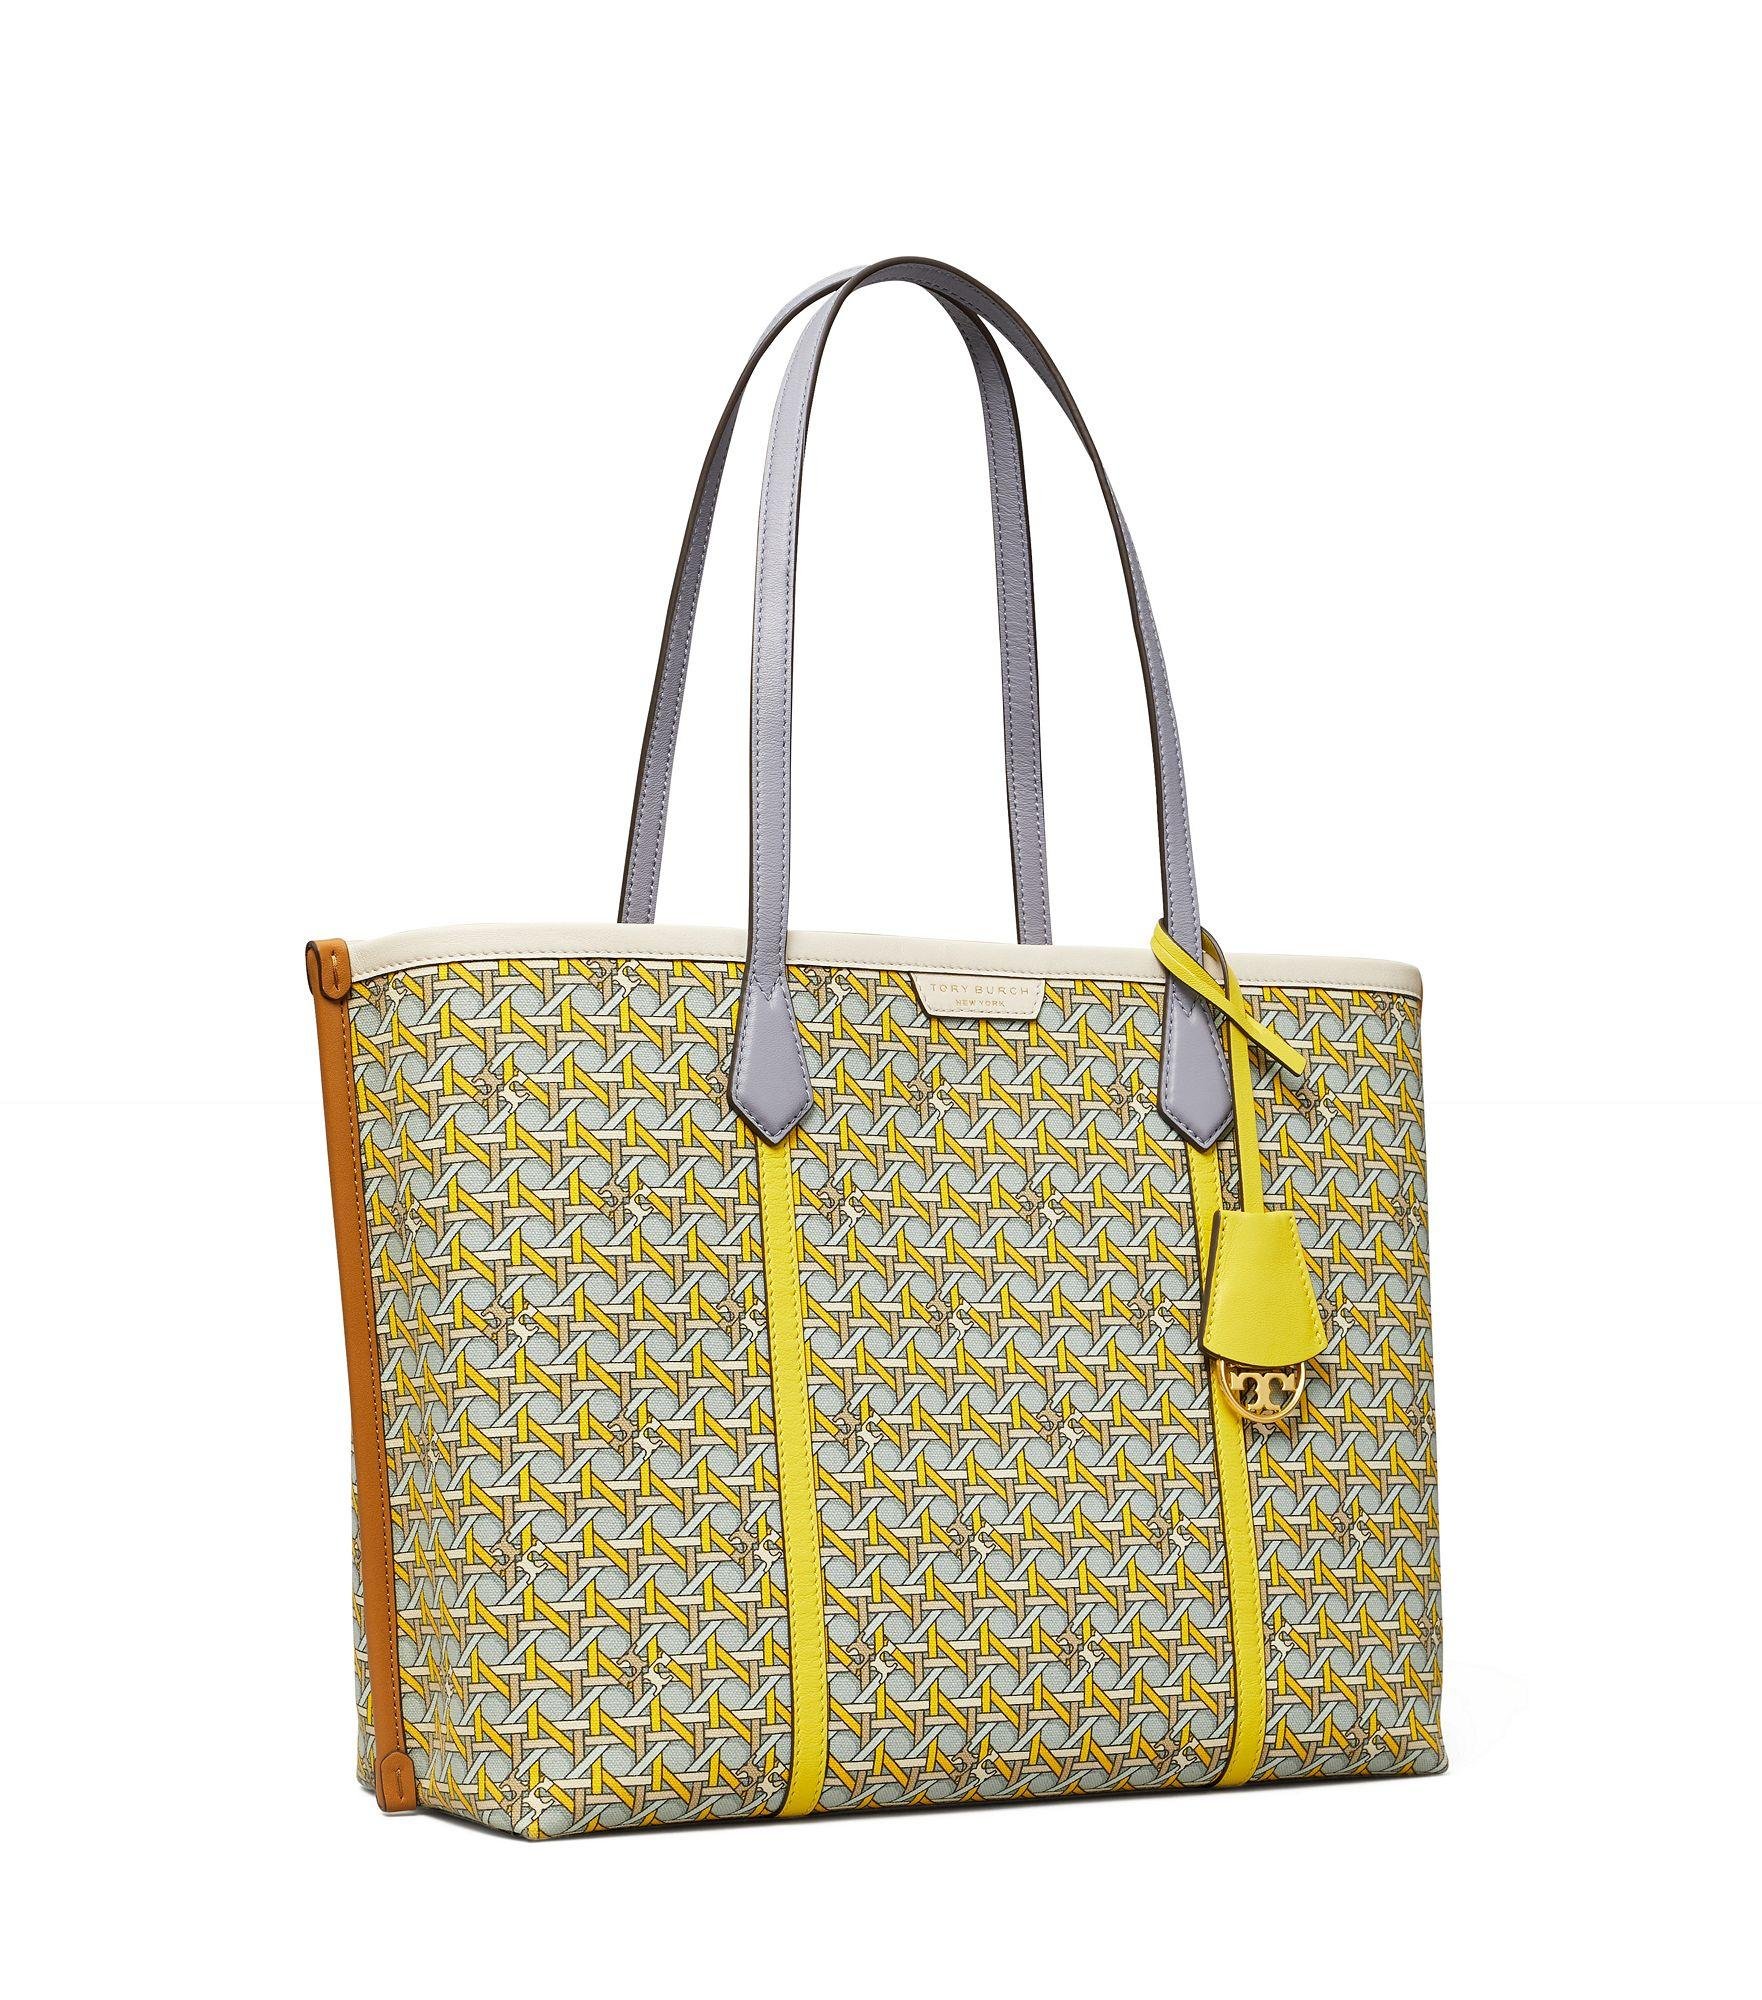 Women's Perry Tote Bag by Tory Burch